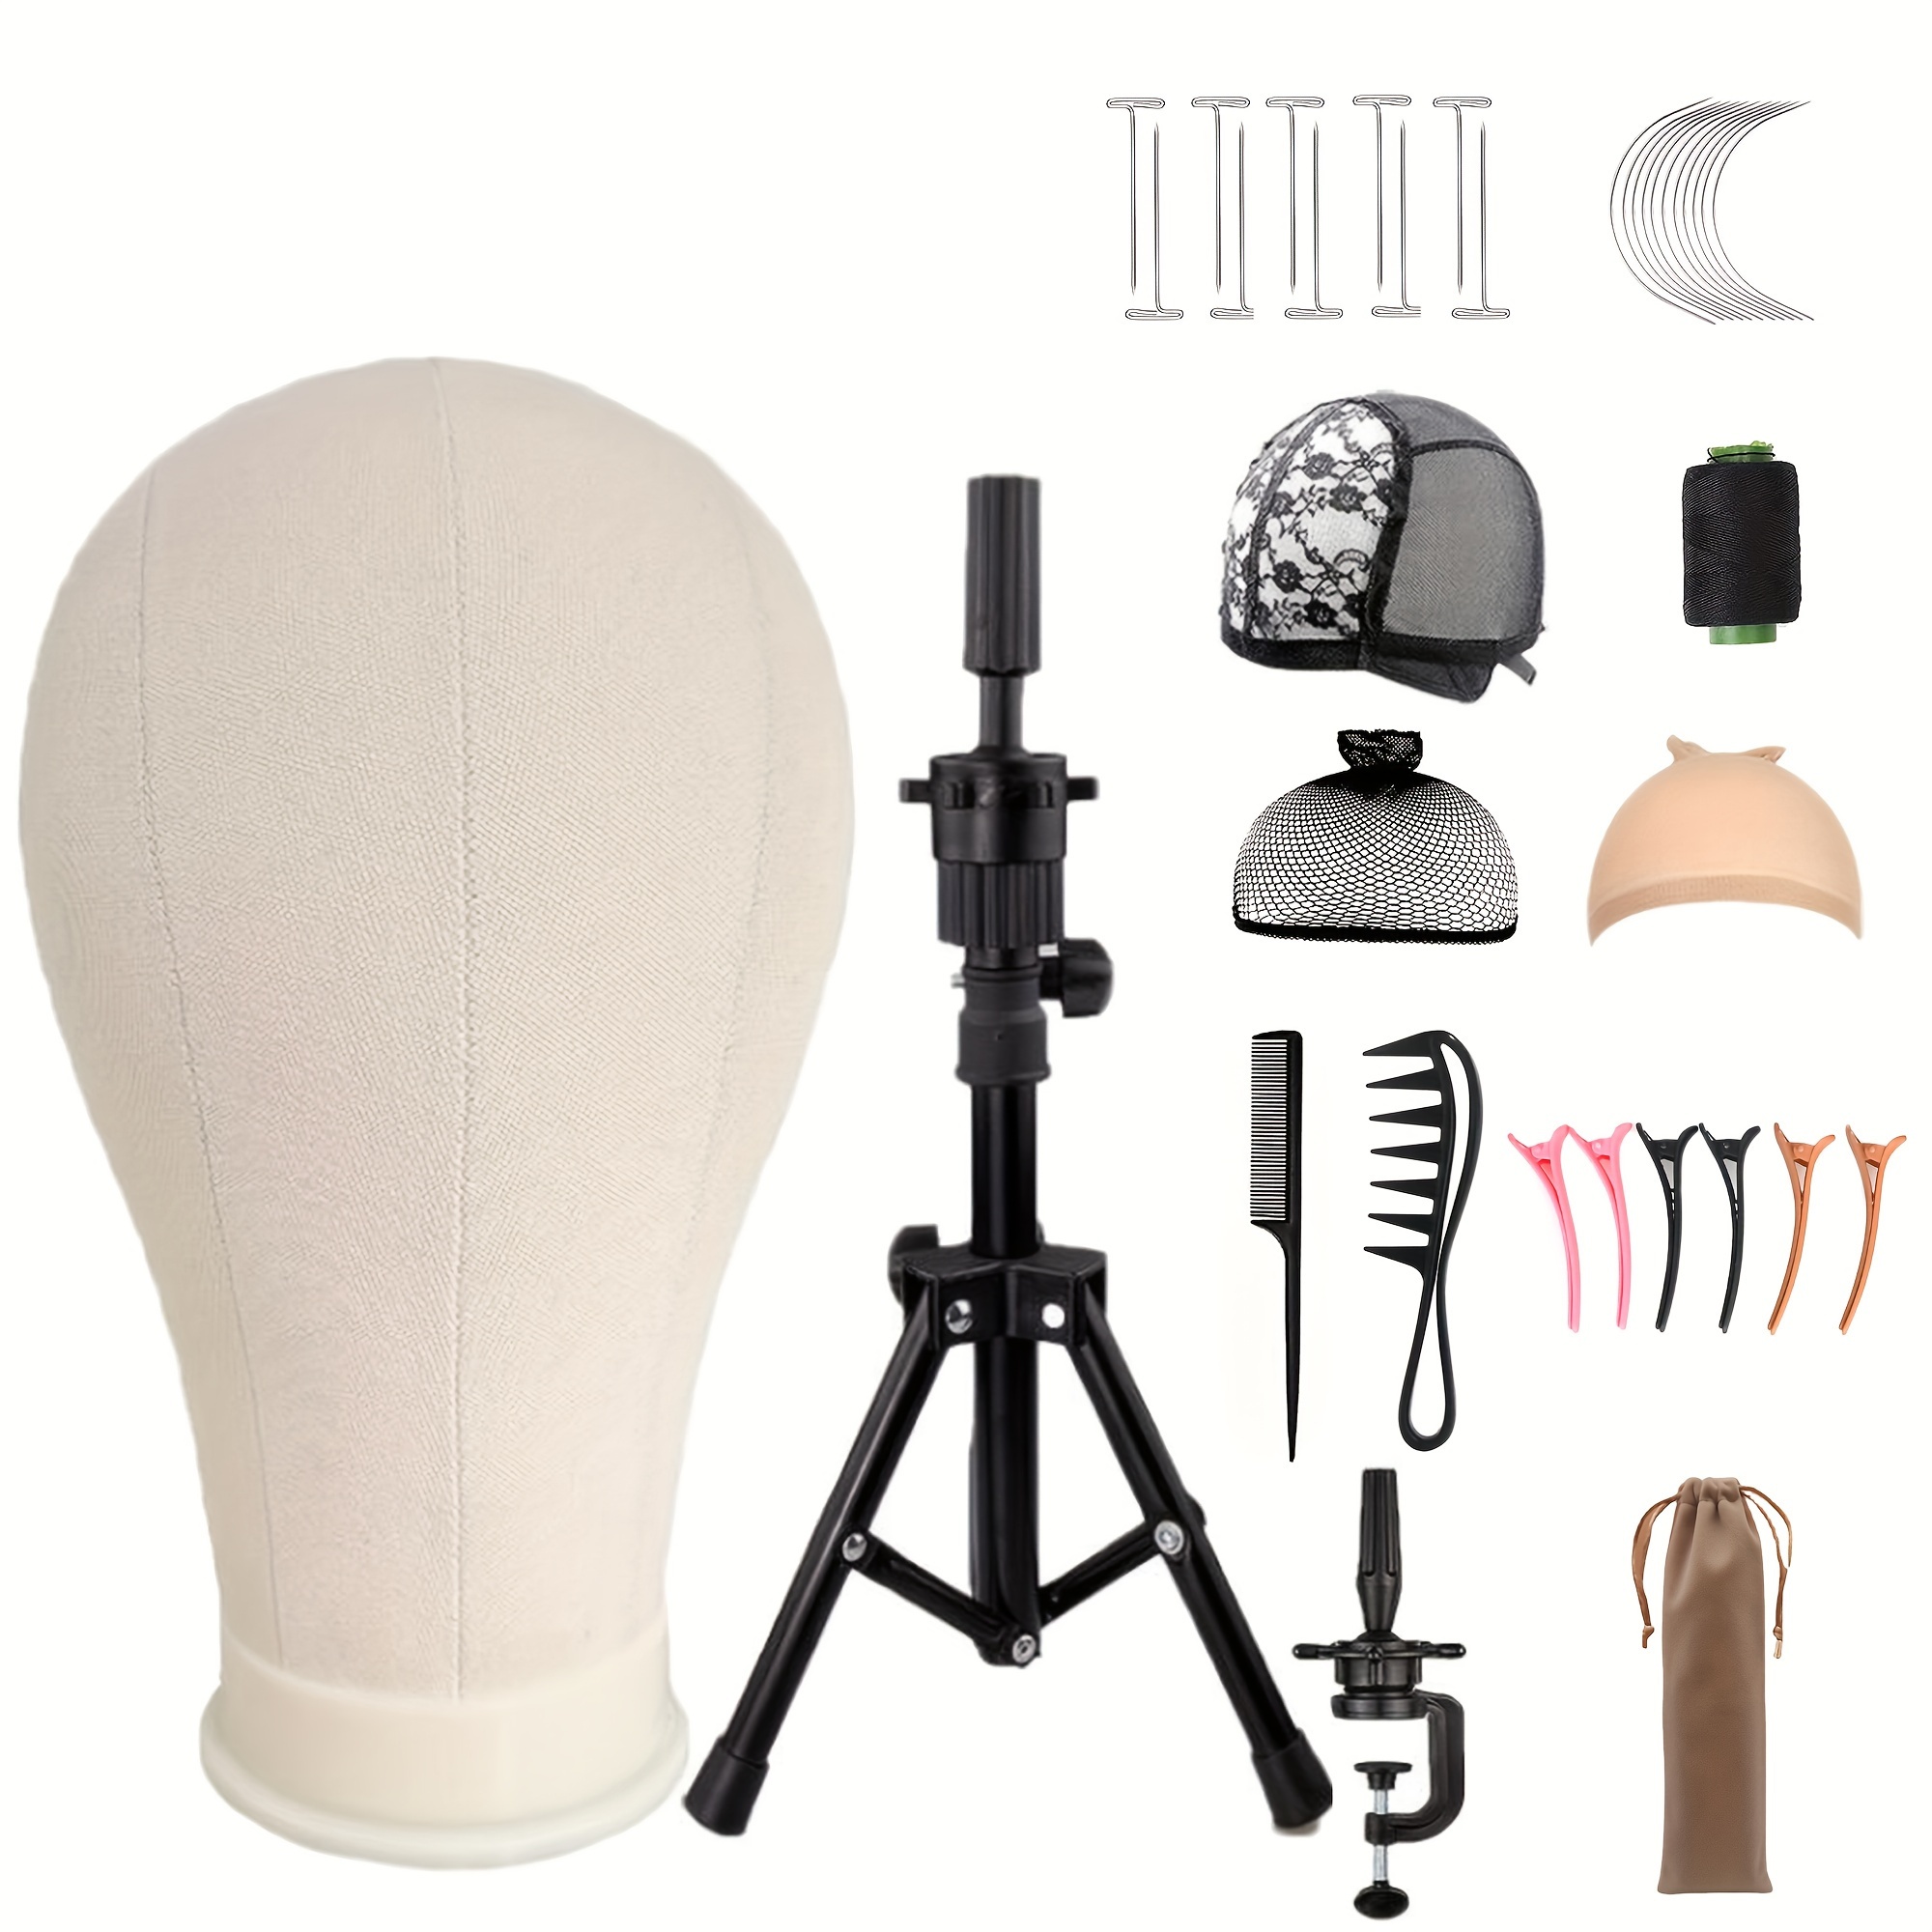 Wig Head 23 Wig Stand Tripod with Mannequin Head,Wig Head Stand Canvas Head